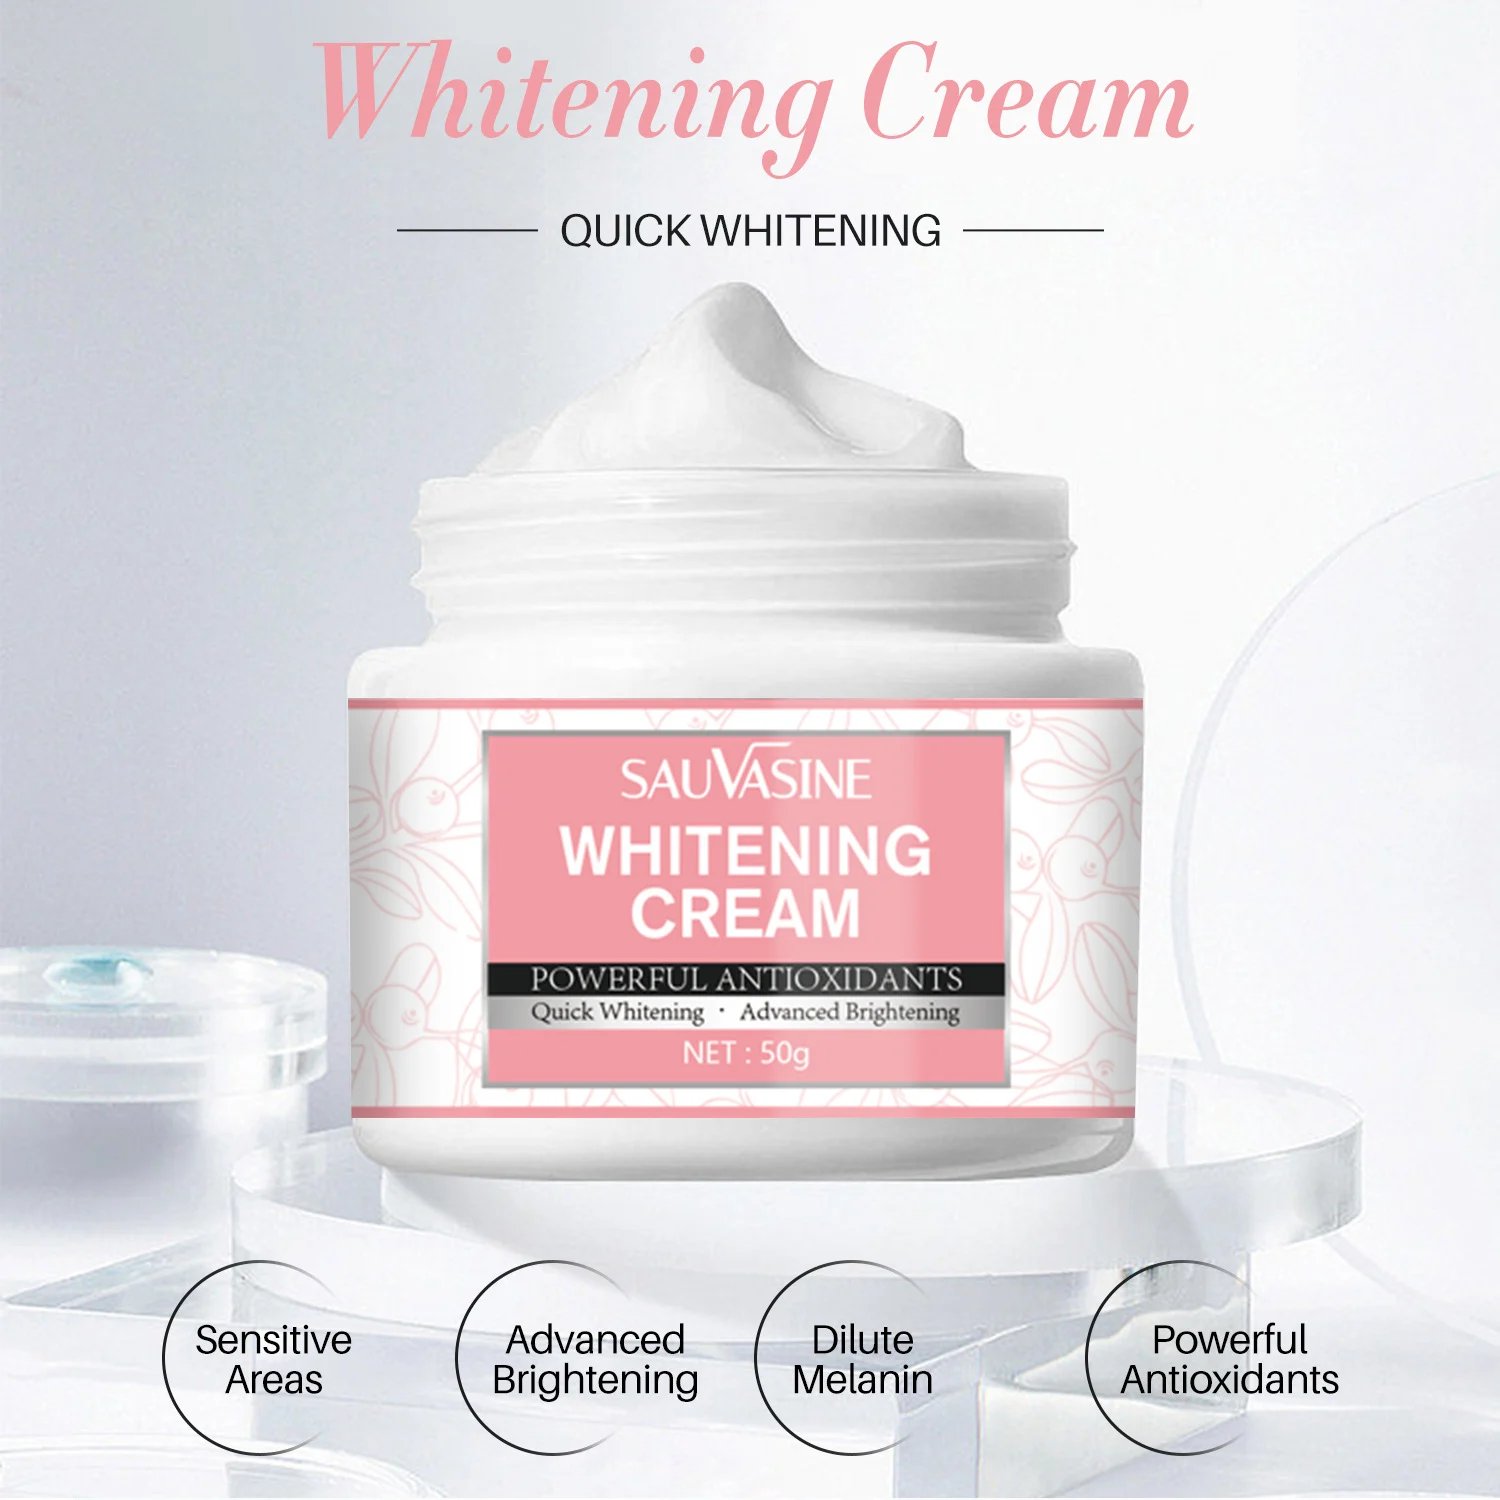 🔥Whitening Cream Body Cream Whitening Repair-Recommended by the American Esthetic Association